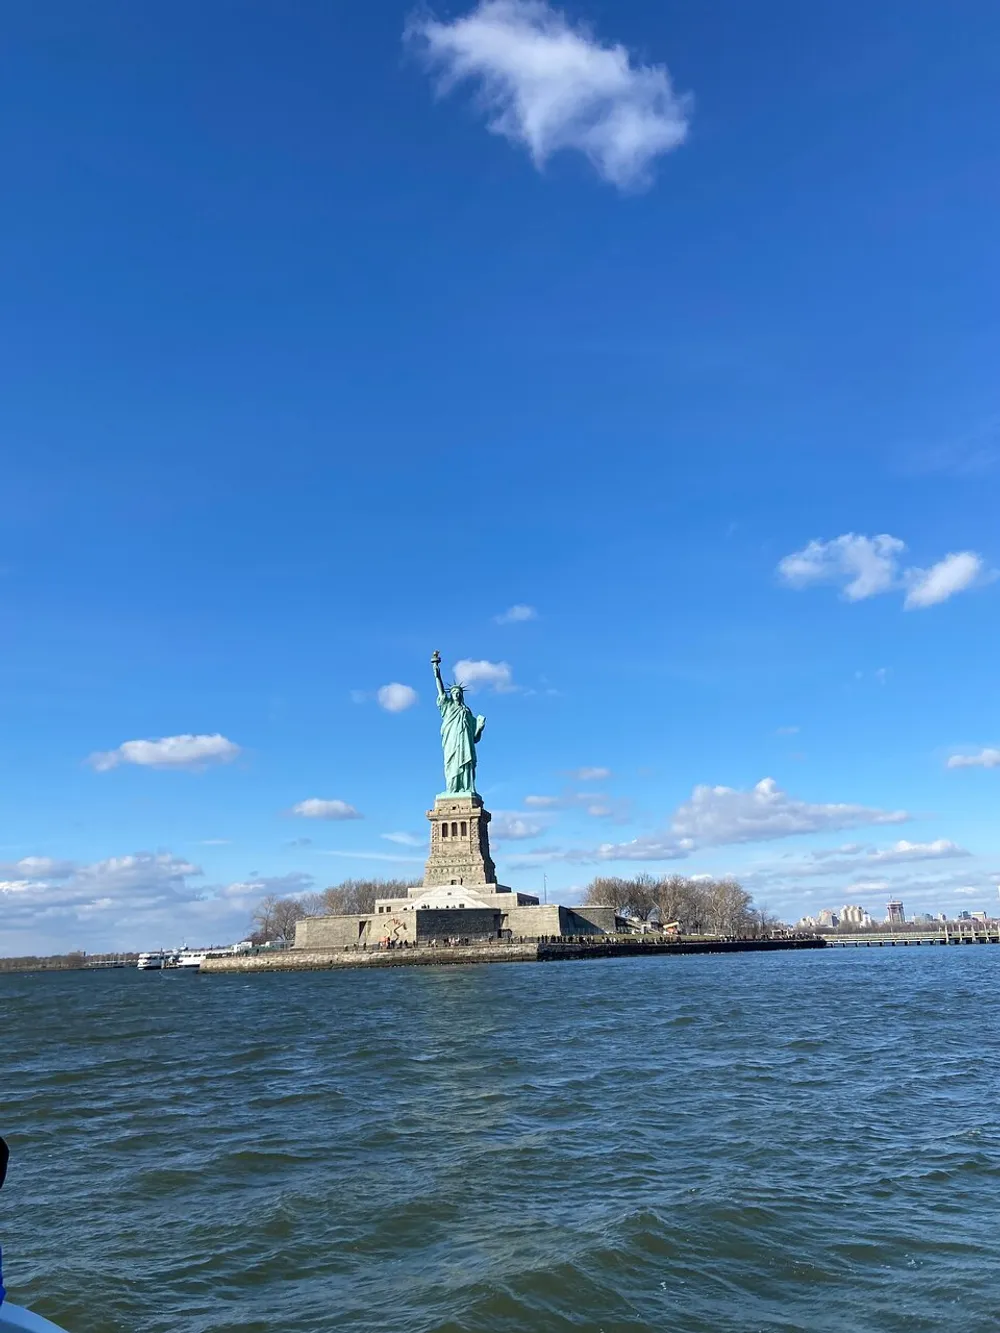 The photo captures the Statue of Liberty standing on Liberty Island against a backdrop of clear blue sky with scattered clouds viewed from the perspective of the surrounding water